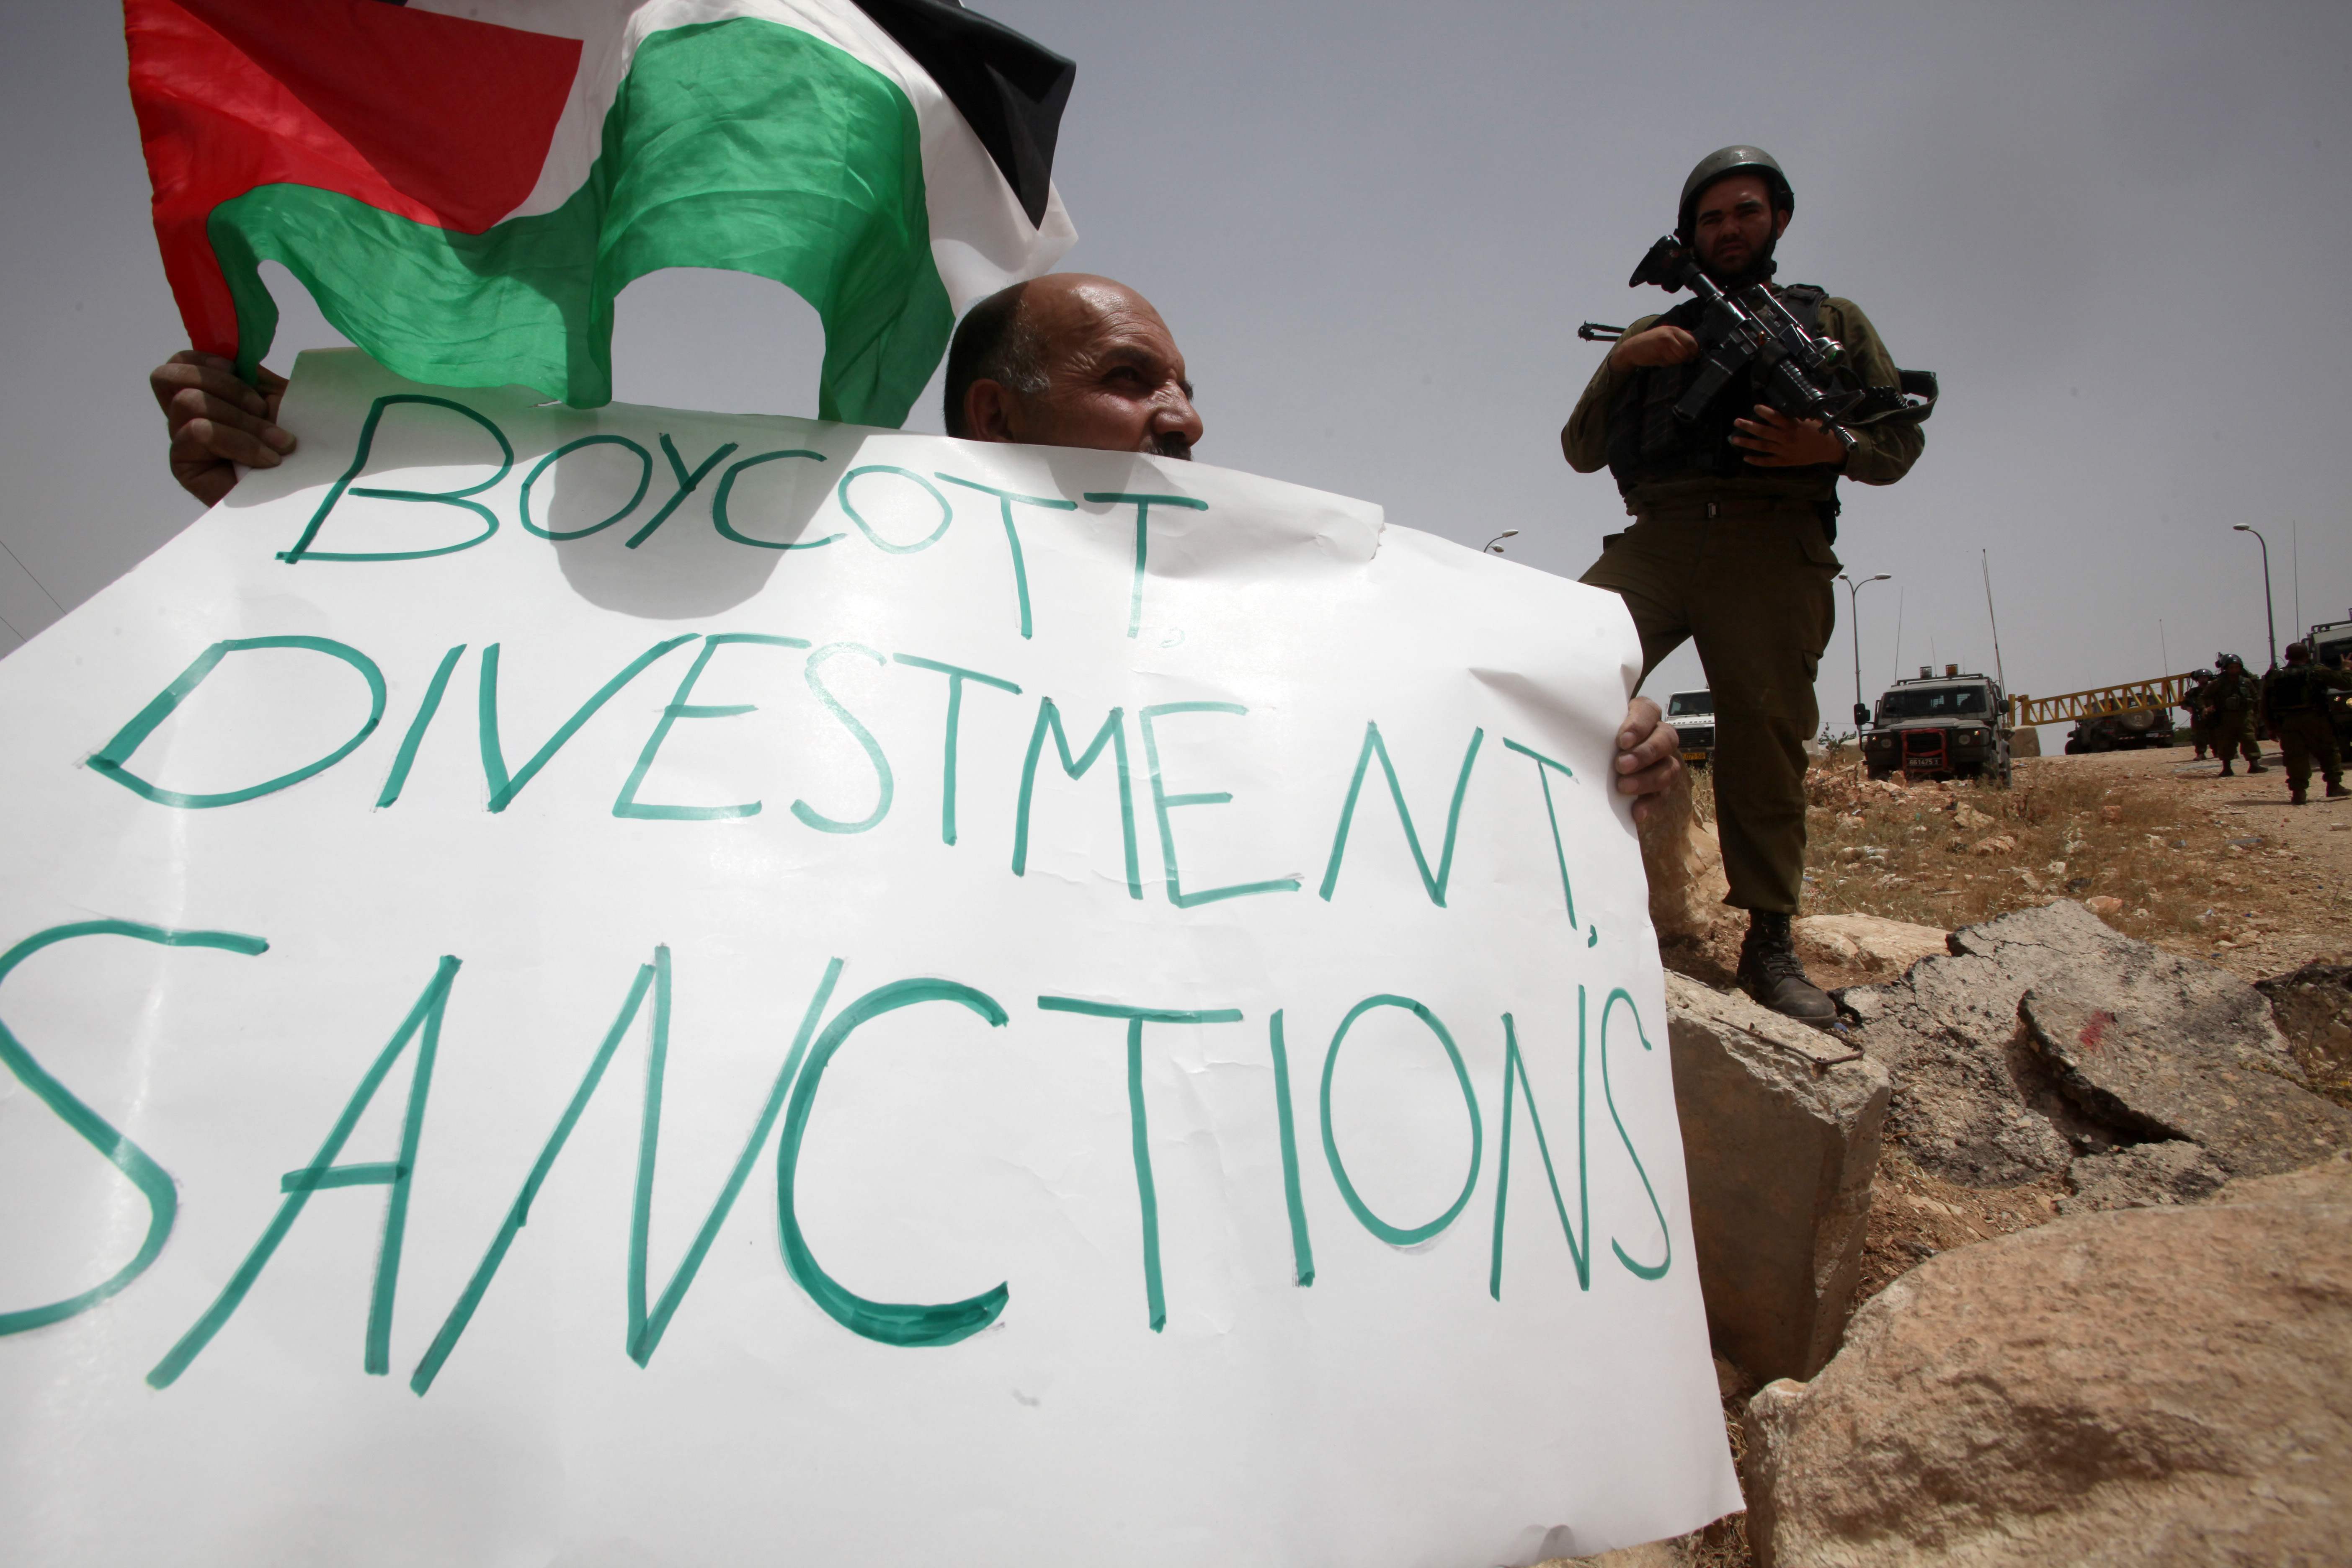 A Palestinian holds a placard that reads ‘Boycott, divestment, sanctions’